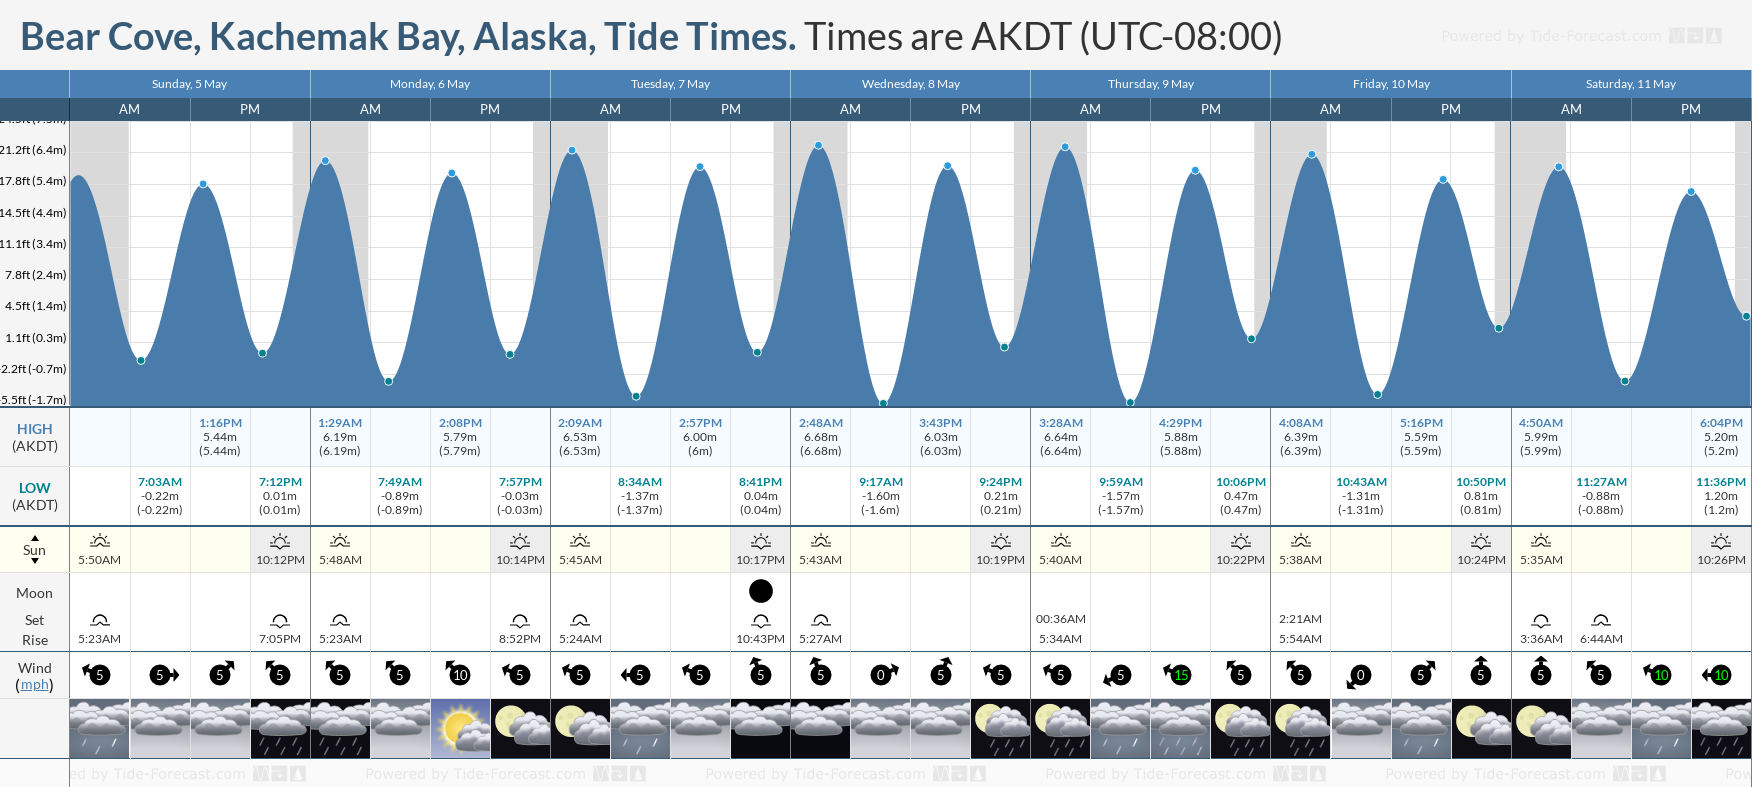 Bear Cove, Kachemak Bay, Alaska Tide Chart including high and low tide tide times for the next 7 days